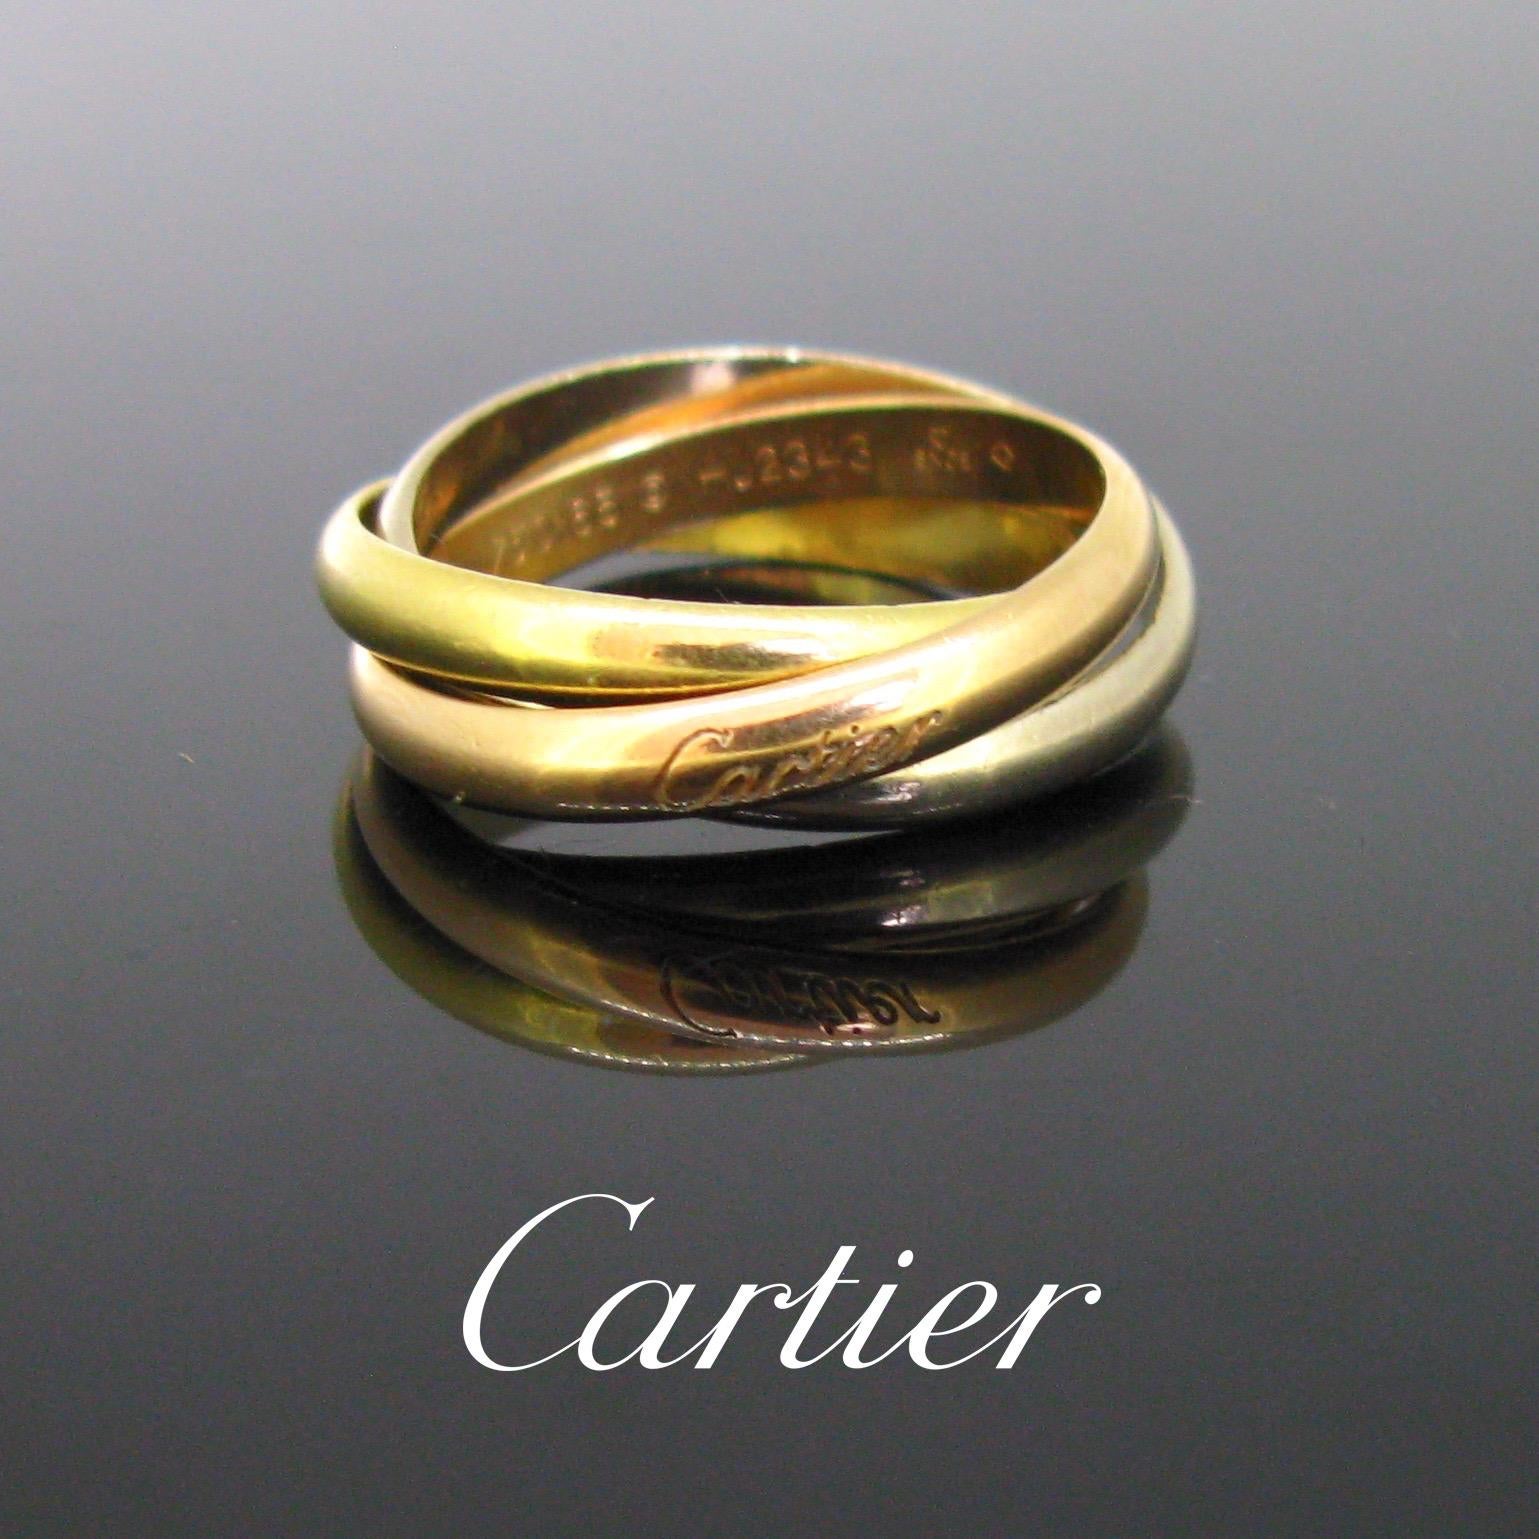 This timeless ring comprises of 3 bands: one rose, one yellow and one white, all is 18kt gold. The rose one is signed and numbered. Louis Cartier created the Trinity collection in 1924 for his friend the famous French poet Jean Cocteau. The rose